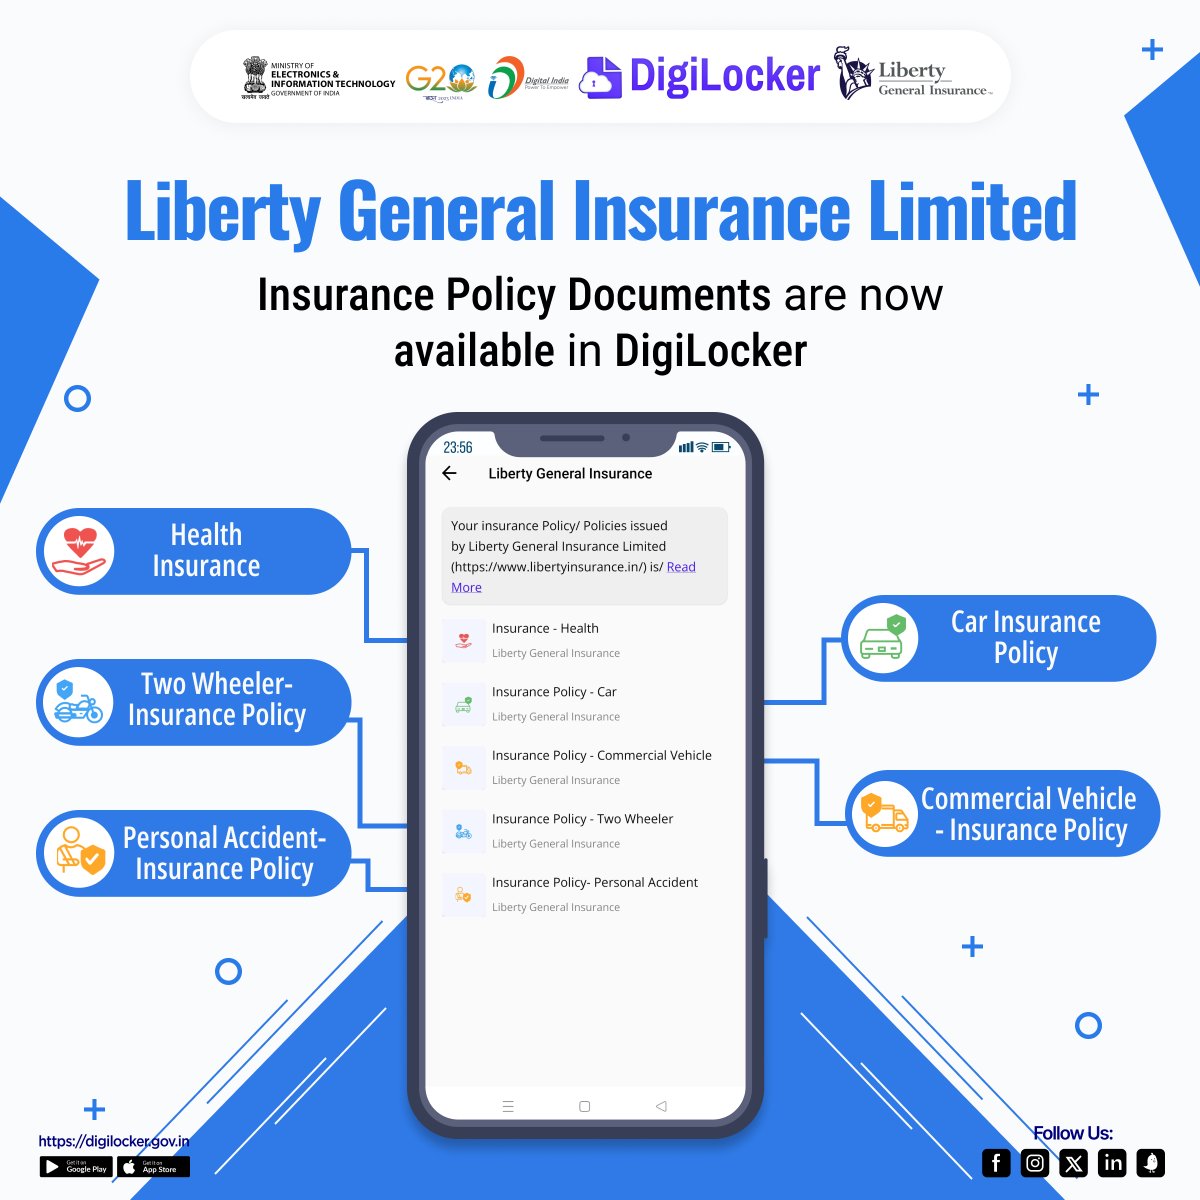 Access your Liberty General Insurance policies hassle-free with DigiLocker! Store and retrieve your Health, Car, Commercial Vehicle, Two Wheeler and Personal Accident policies securely through #DigiLocker app. #LibertyGeneralInsurance #DigitalInsurance